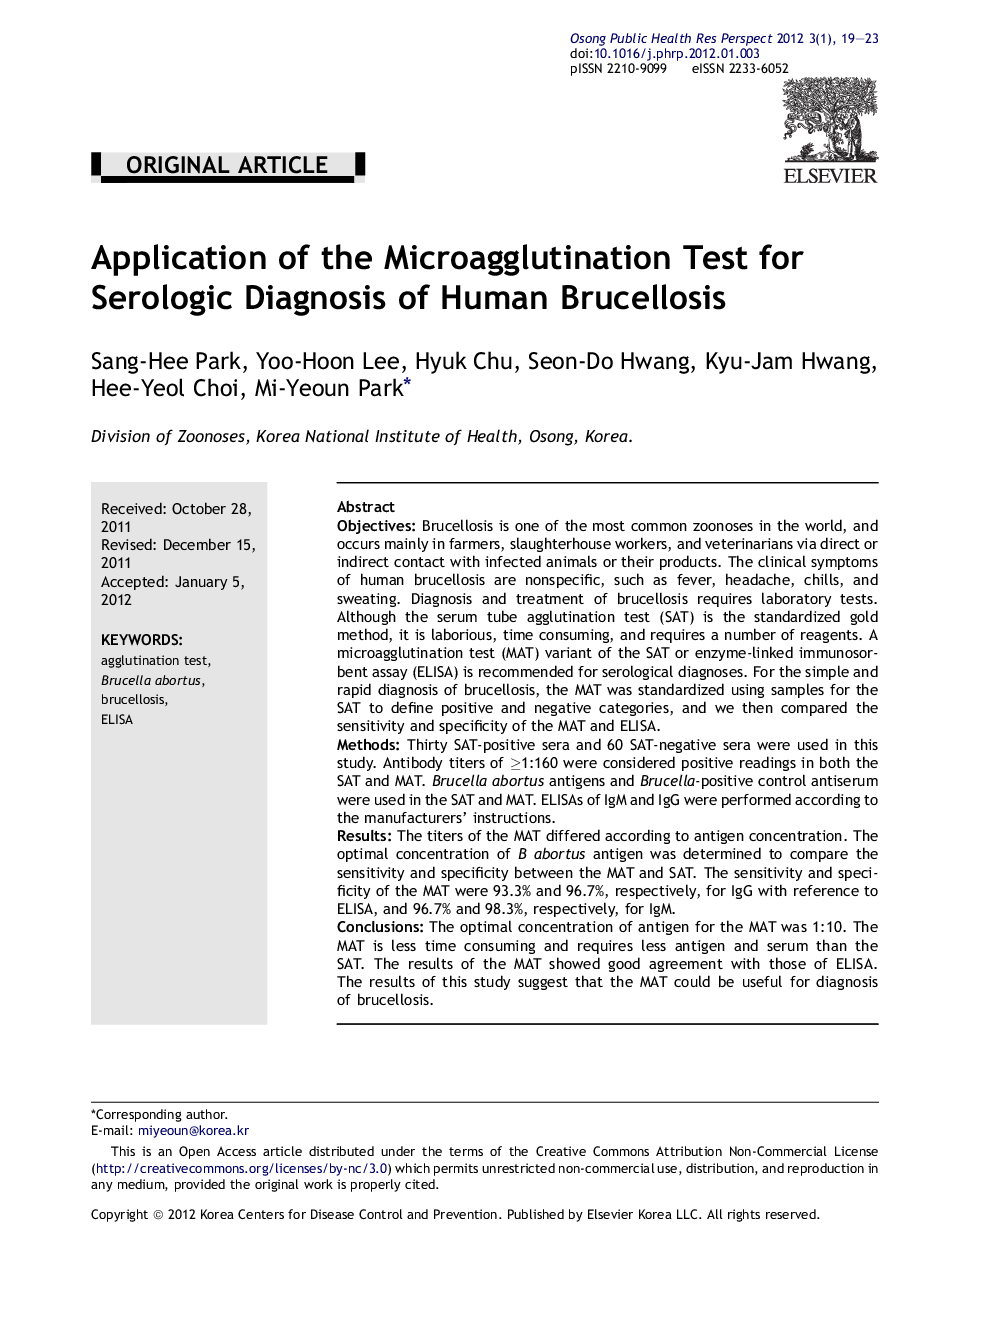 Application of the Microagglutination Test for Serologic Diagnosis of Human Brucellosis 